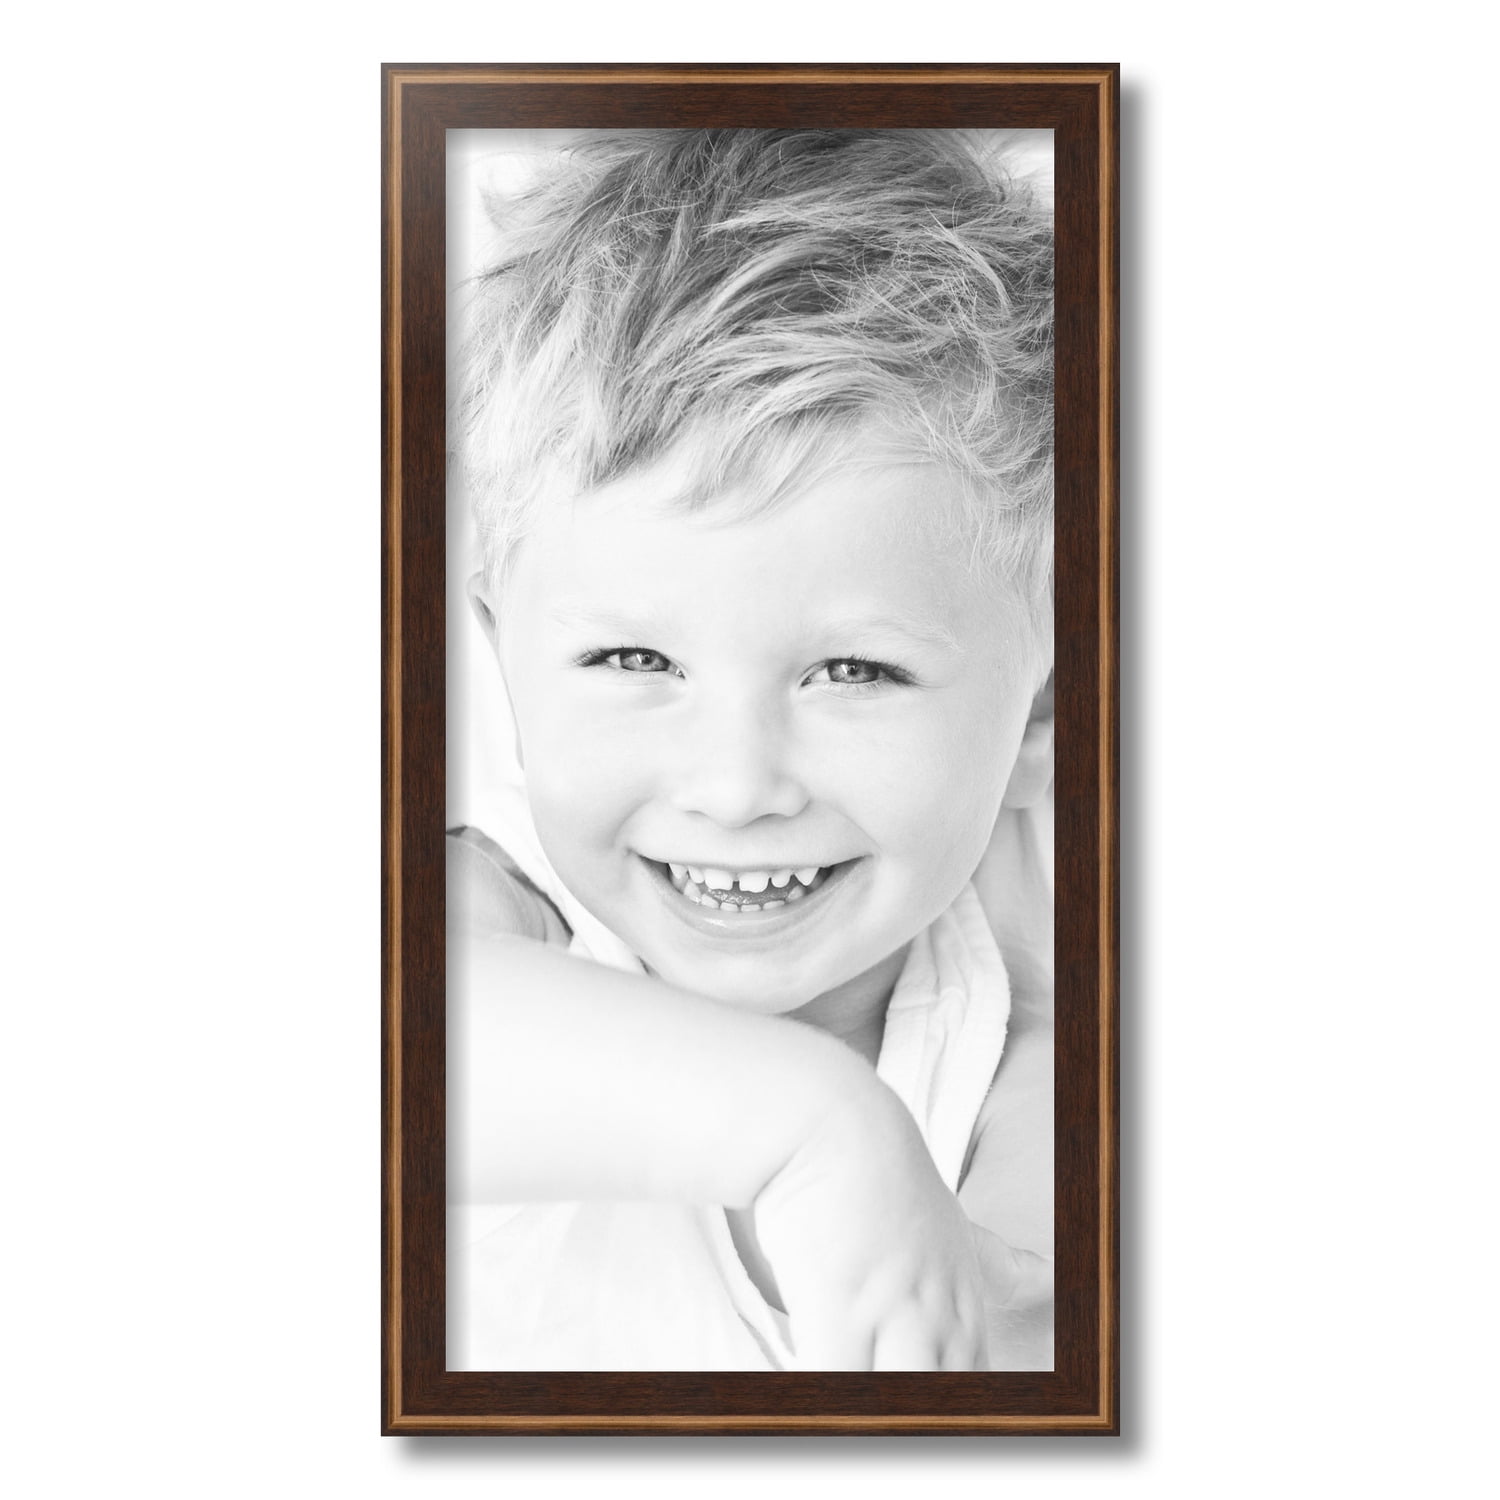  ArtToFrames 10x20 Inch Red Picture Frame, 5 - Pack, This 0.81  inch Custom Wood Poster Frame is Cherry Stain, Comes with Regular Glass  (Frame_Pack_5_0066-81784-YCHY-10x20)